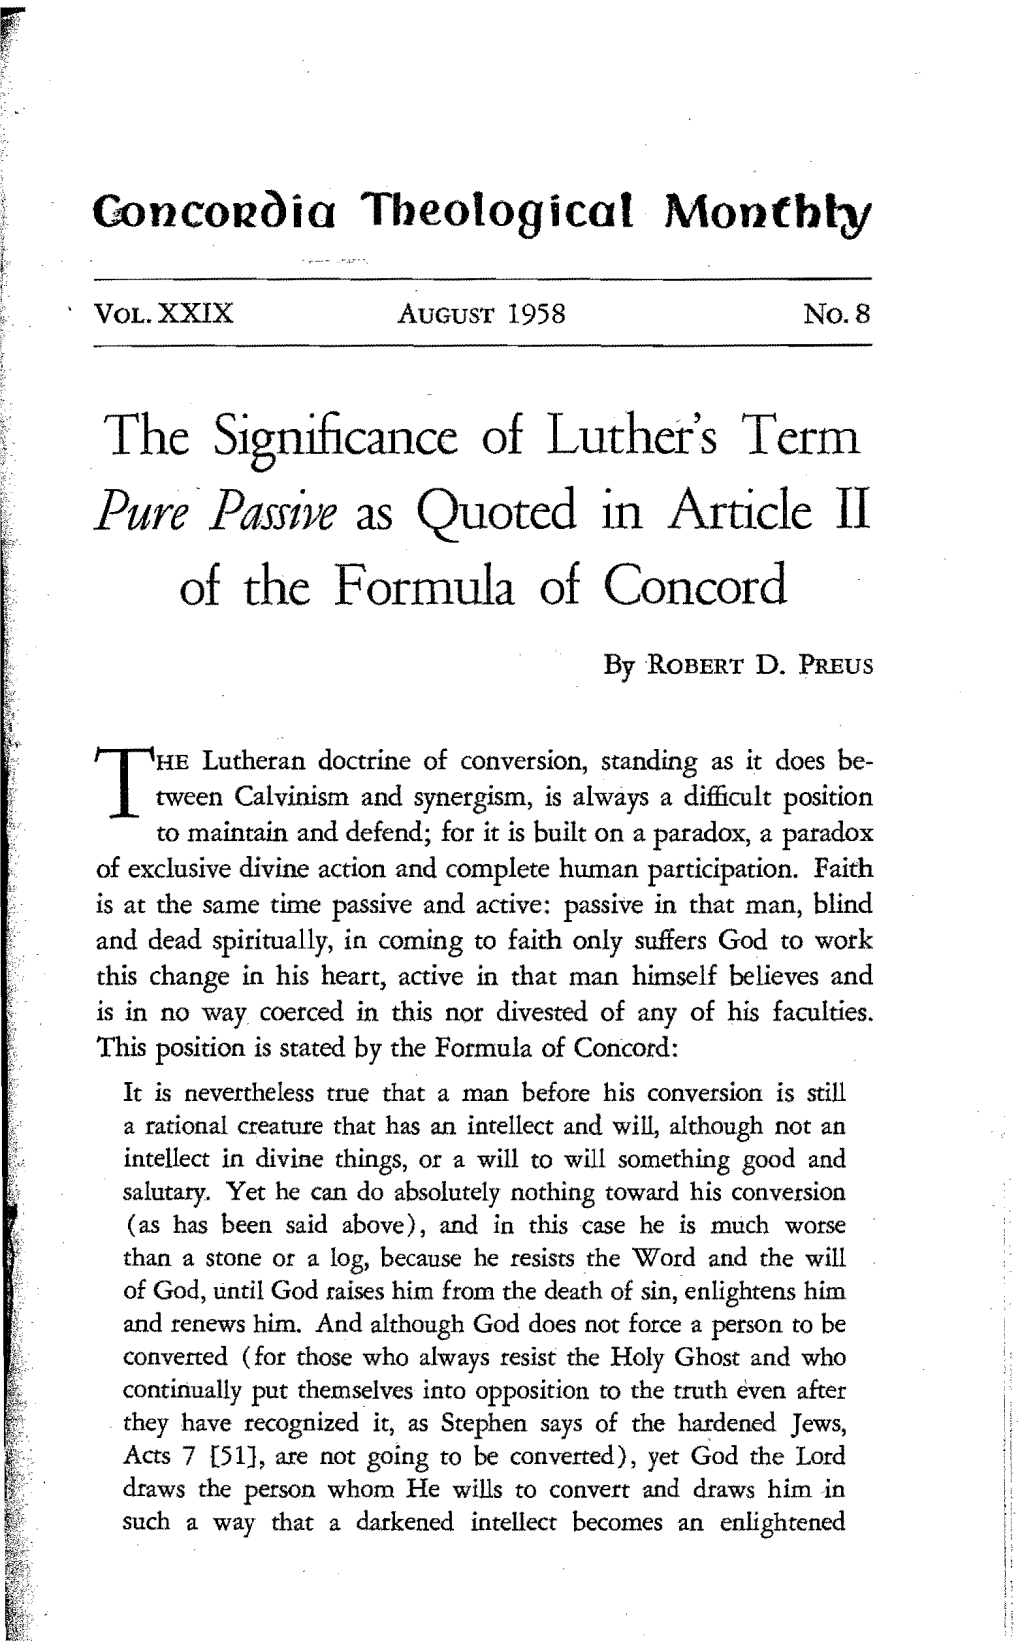 The Significance of Luther's Term Pure -Passive As Quoted in Article II of the Formula of Concord